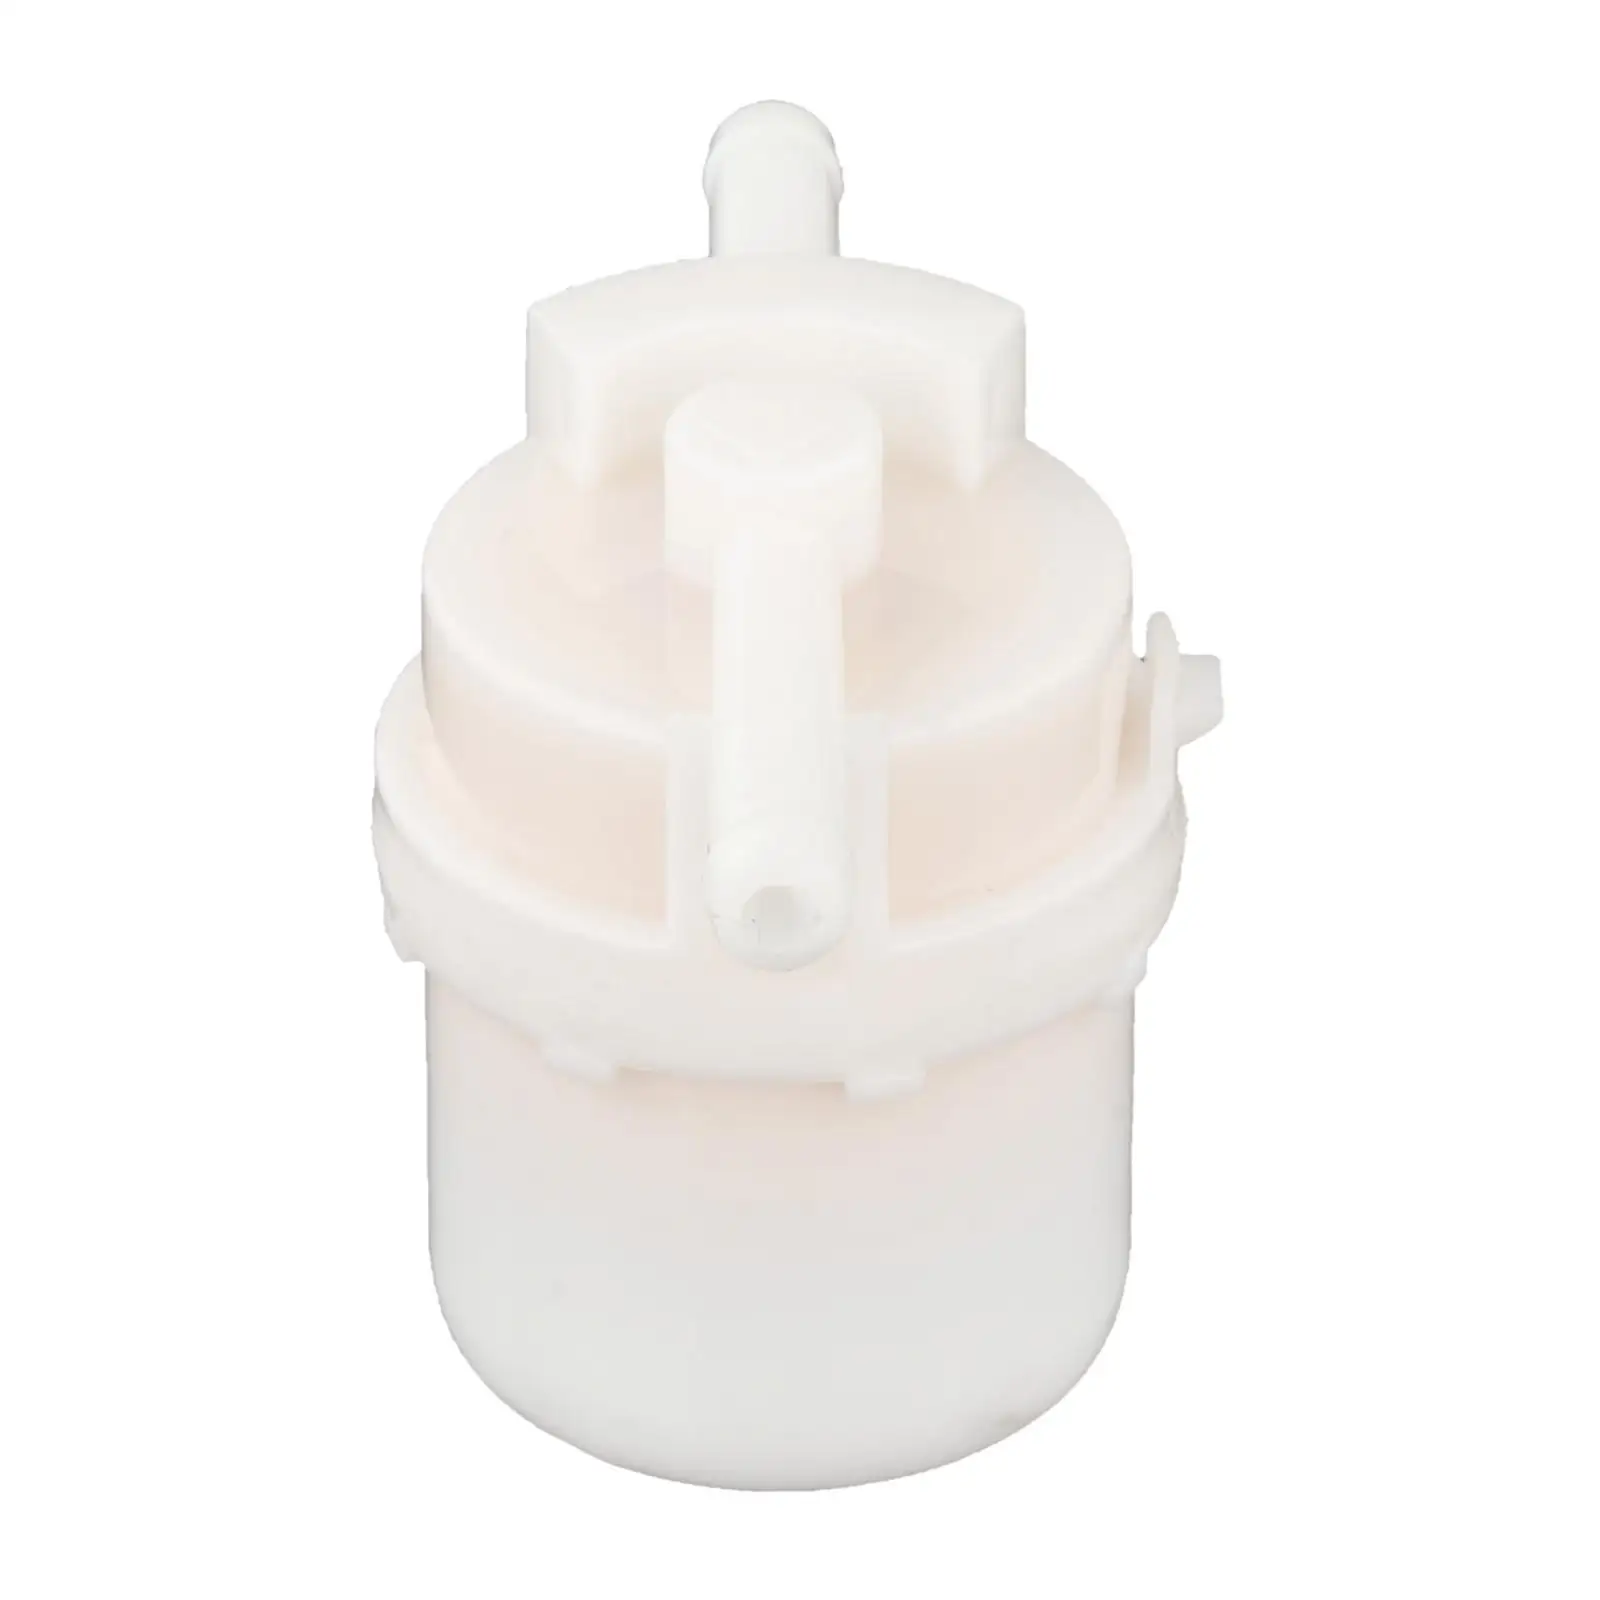 Fuel Filter 16900-Sa5-004 Replacement Plastic Fit for Honda Outboard Parts Accessories Easy to Install Durable Professional